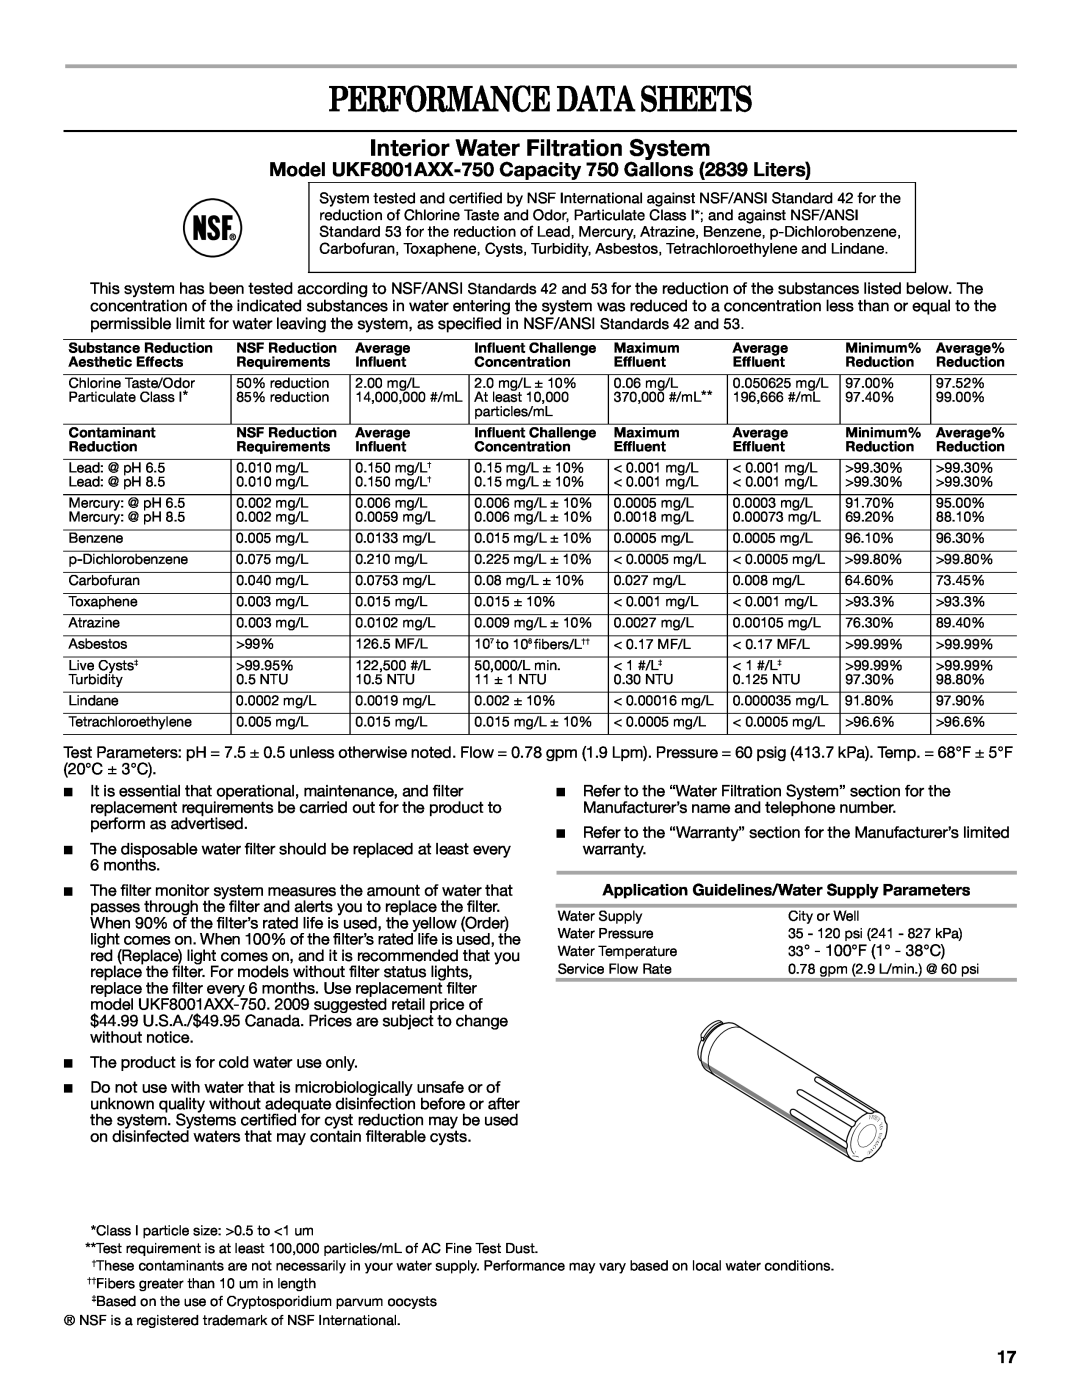 Whirlpool W10329360A installation instructions Performance Data Sheets, Interior Water Filtration System 